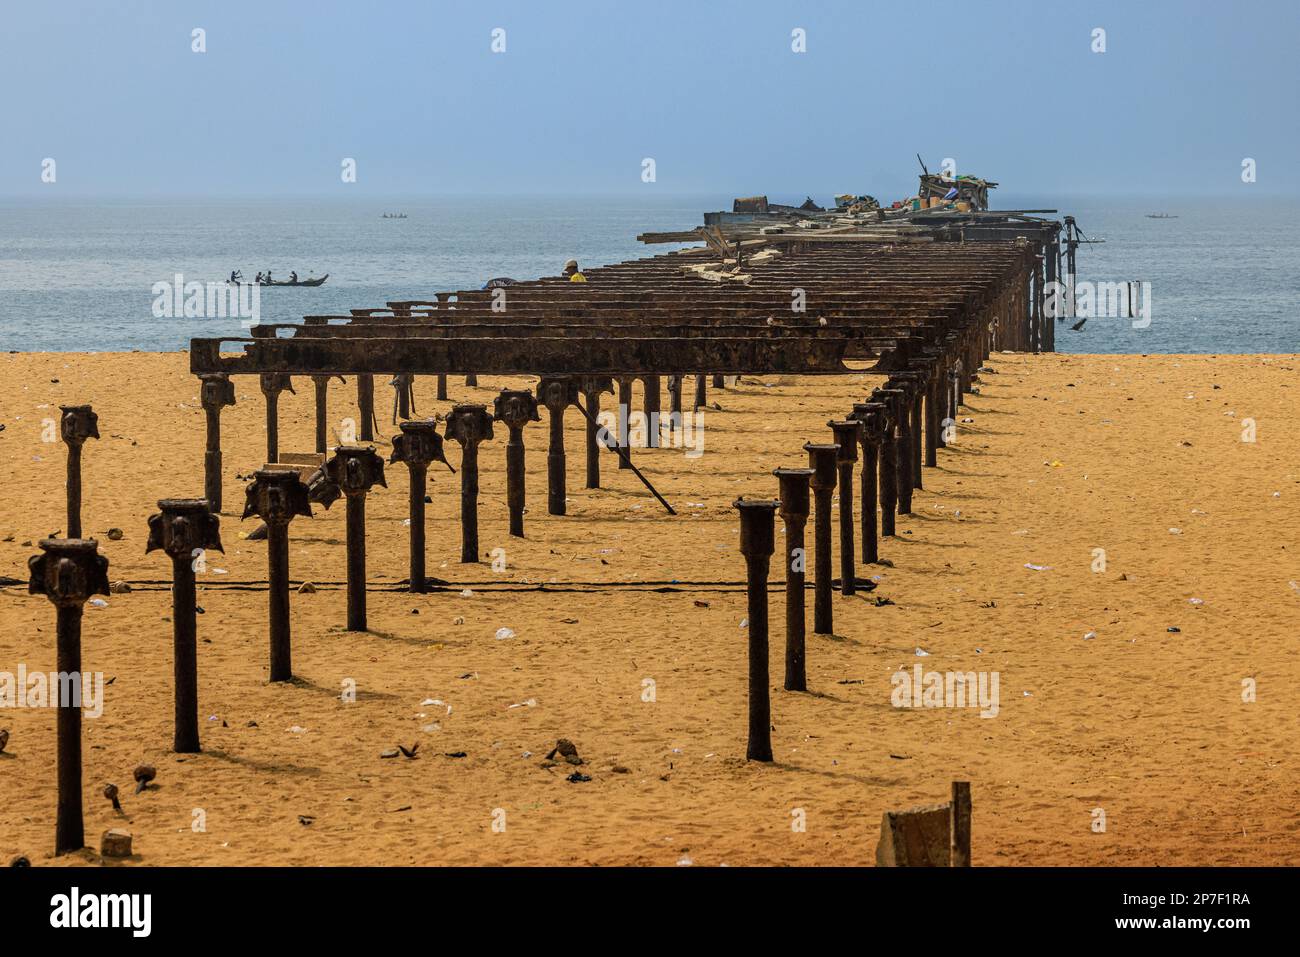 a row of metal supports on the sandy beach in lome leading out into the atlantic ocean are part of the derelict old pier Stock Photo